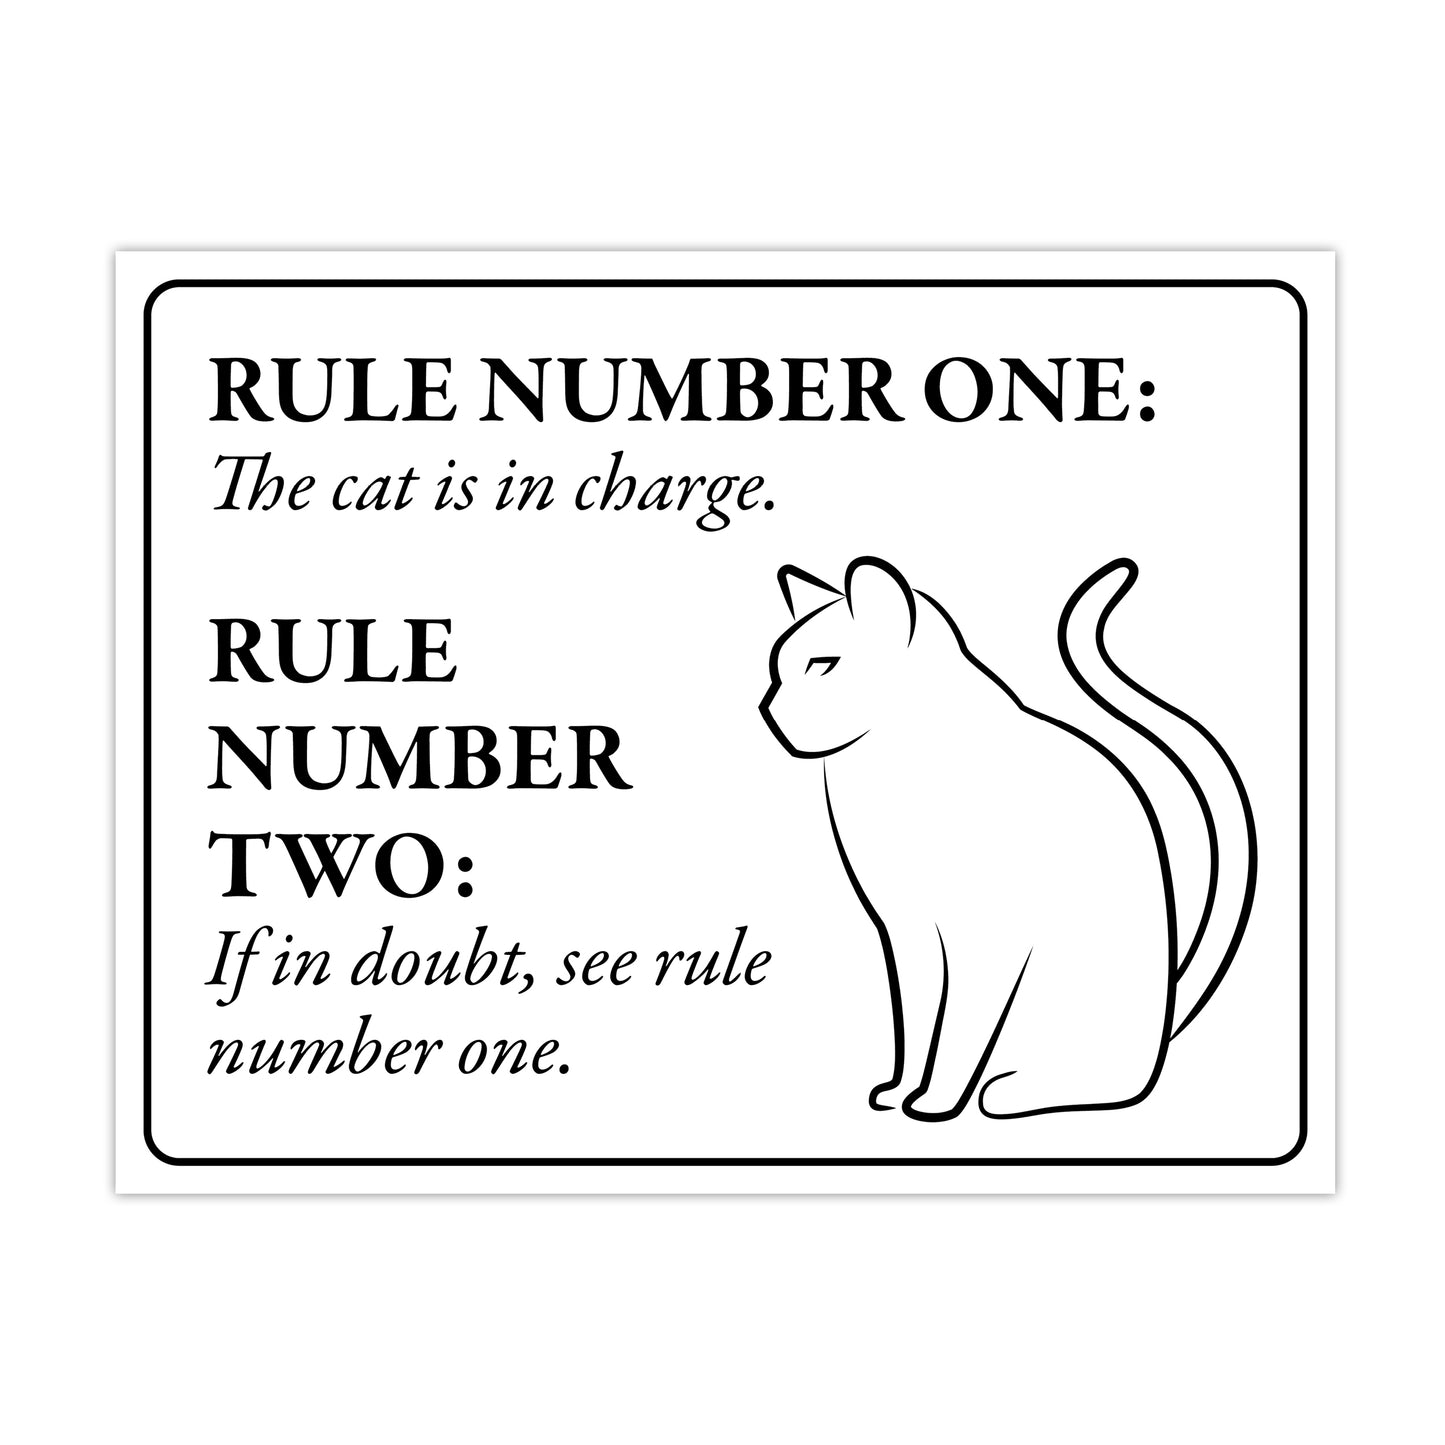 The Cat is In Charge - 8.5" x 11" Funny Laminated Sign